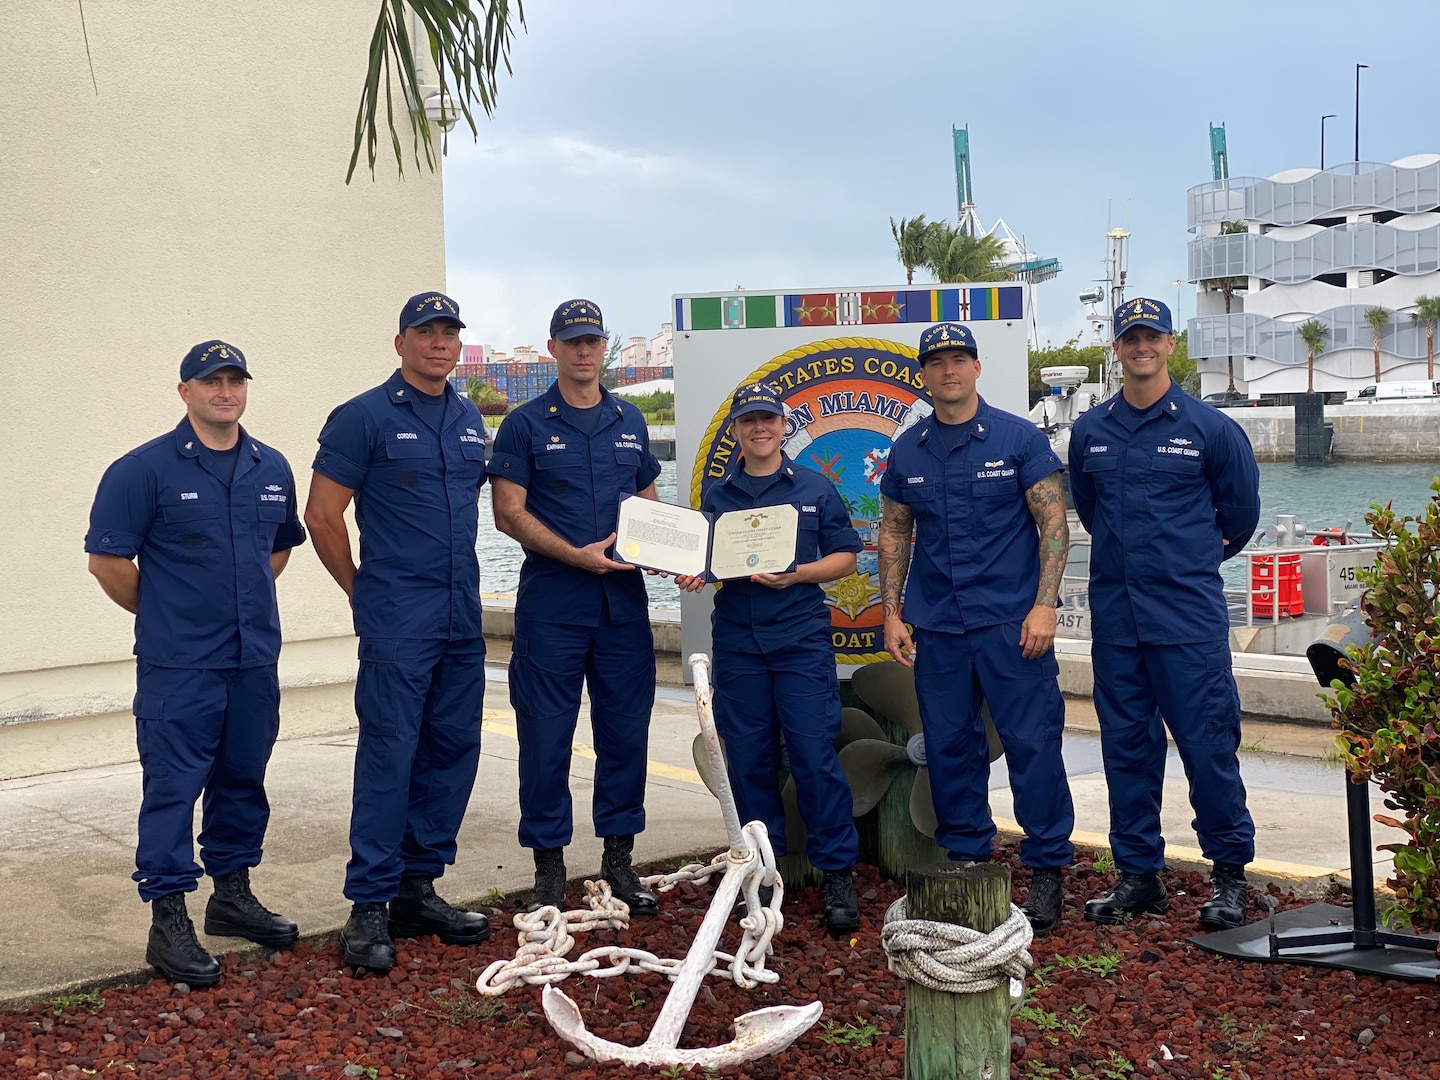 Petty Officer 1st Class Melissa Lopez del Castillo stands with her crewmembers at Station Miami Beach, Fla. Photo courtesy Petty Officer 1st Class Melissa Lopez del Castillo.